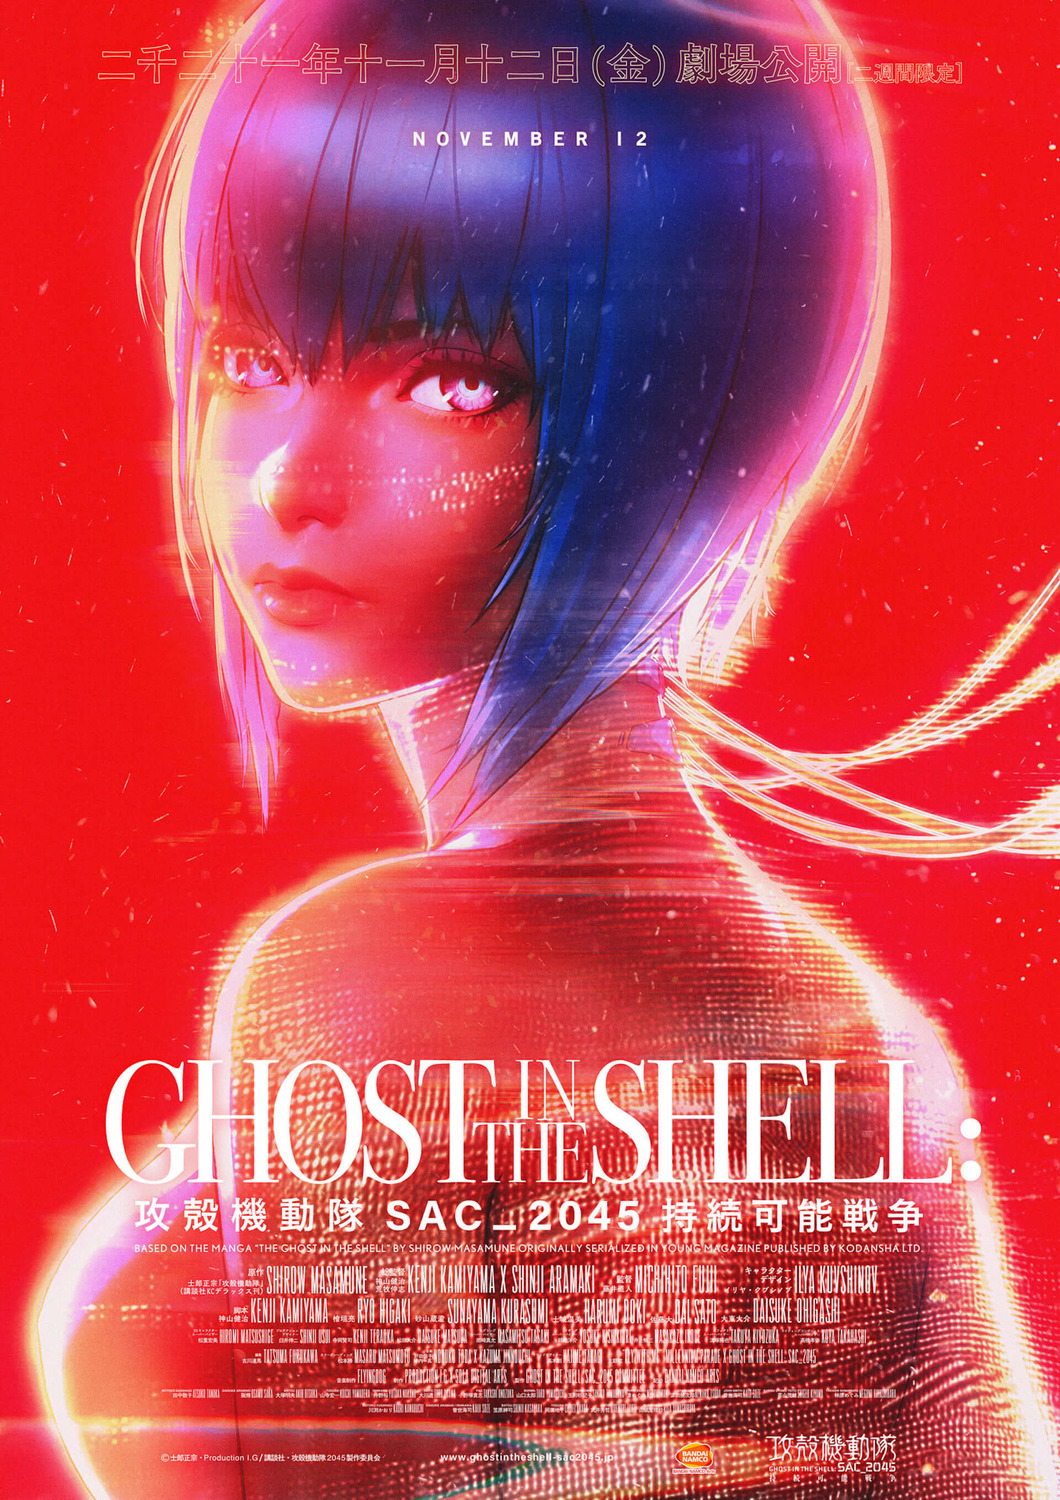 Ghost in the Shell SAC_2045 Sustainable Warfare (1 of 2) Extra